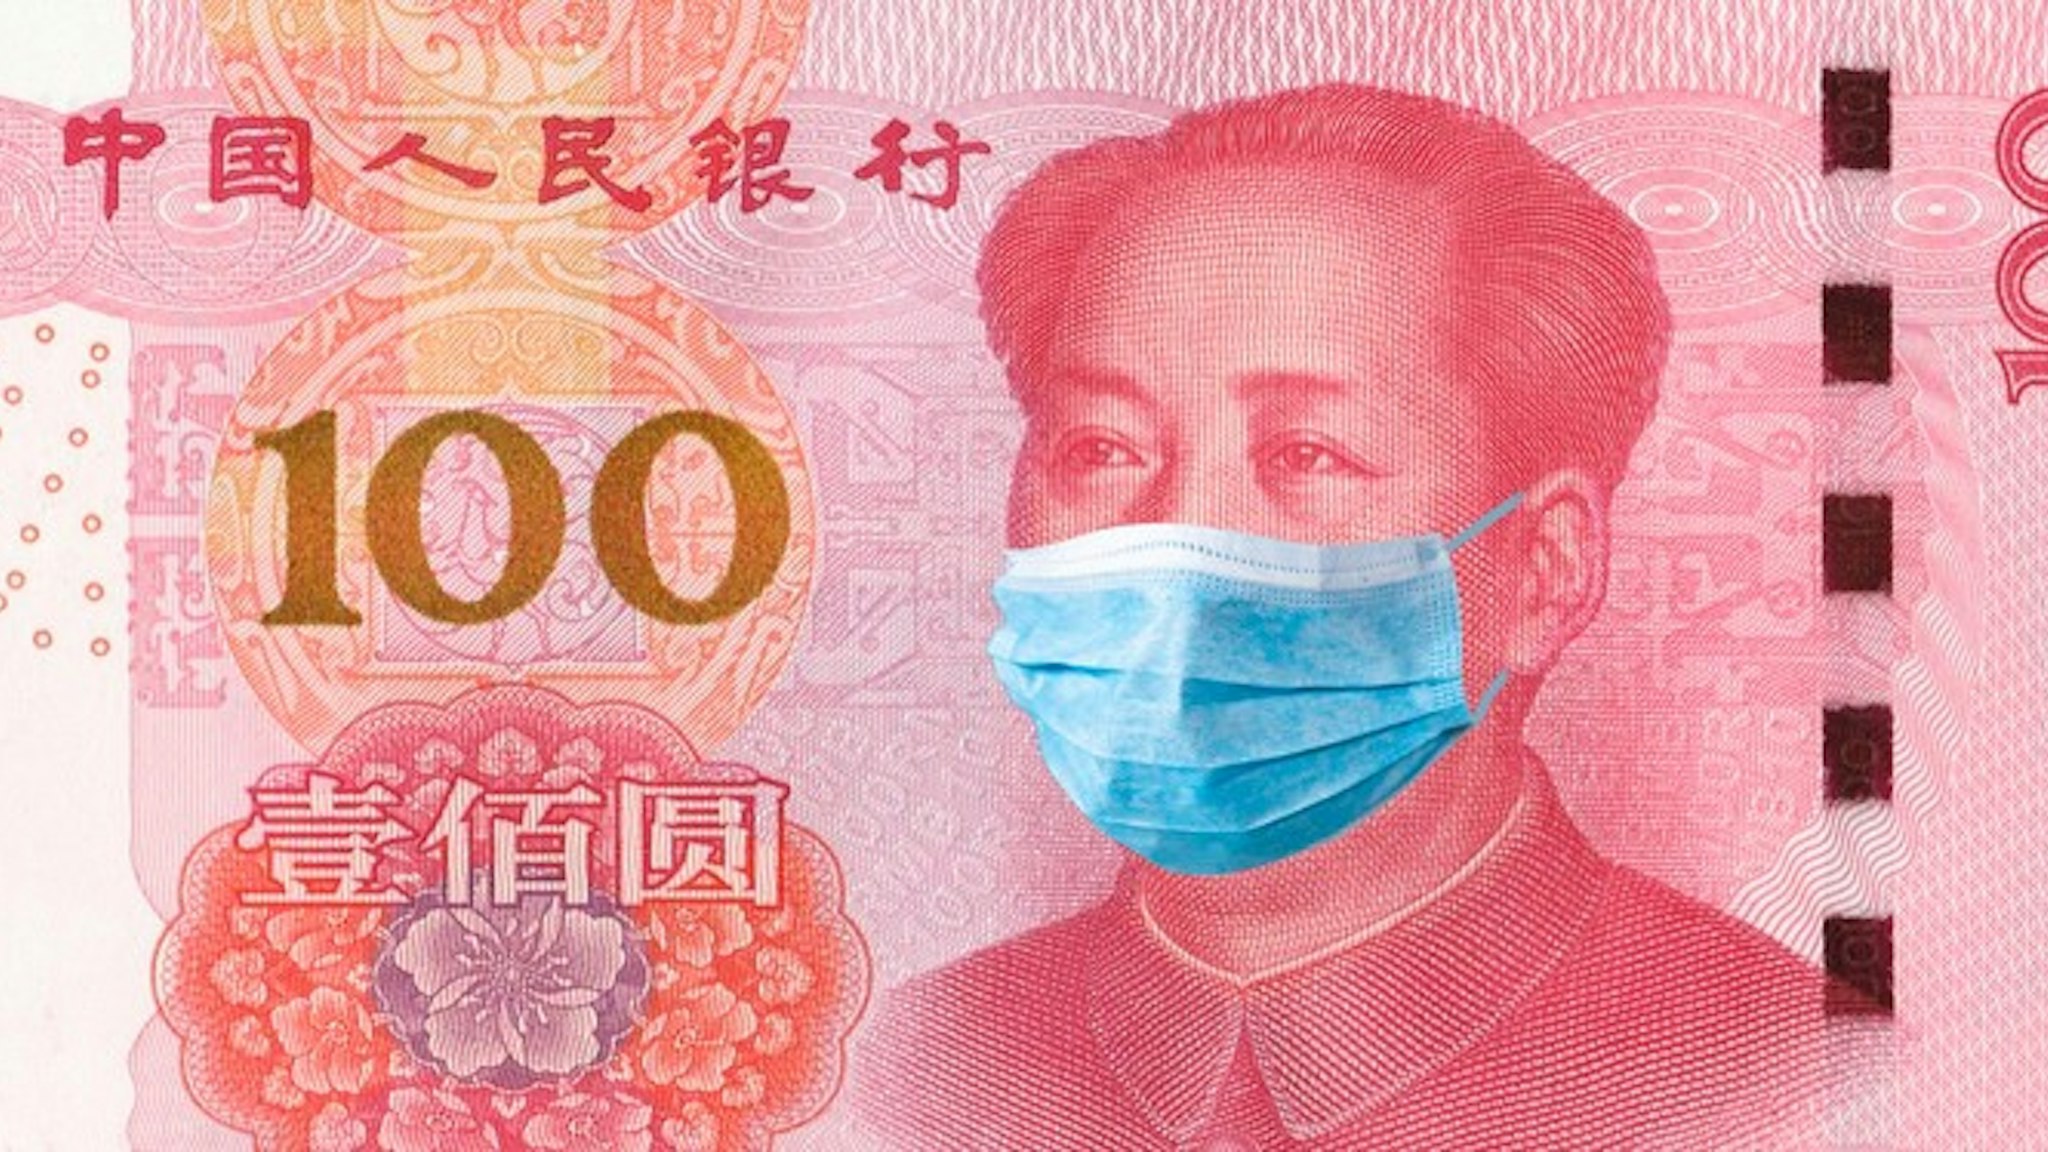 Coronavirus Wuhan. China quarantine, 100 yuan banknote with medical mask. The concept of epidemic and protection against coronavrius.